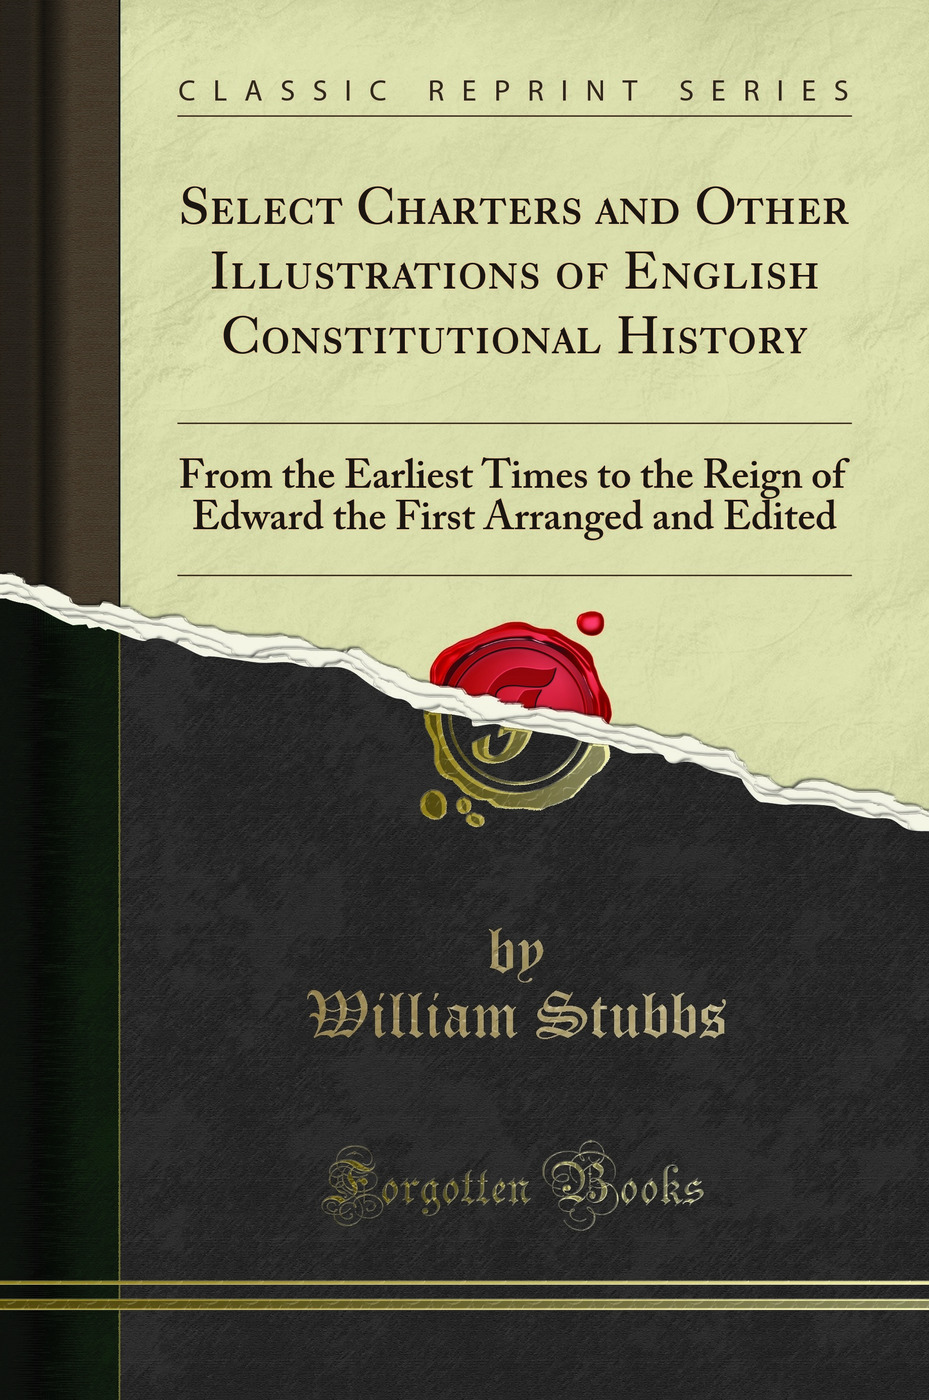 Select Charters and Other Illustrations of English Constitutional History - William Stubbs